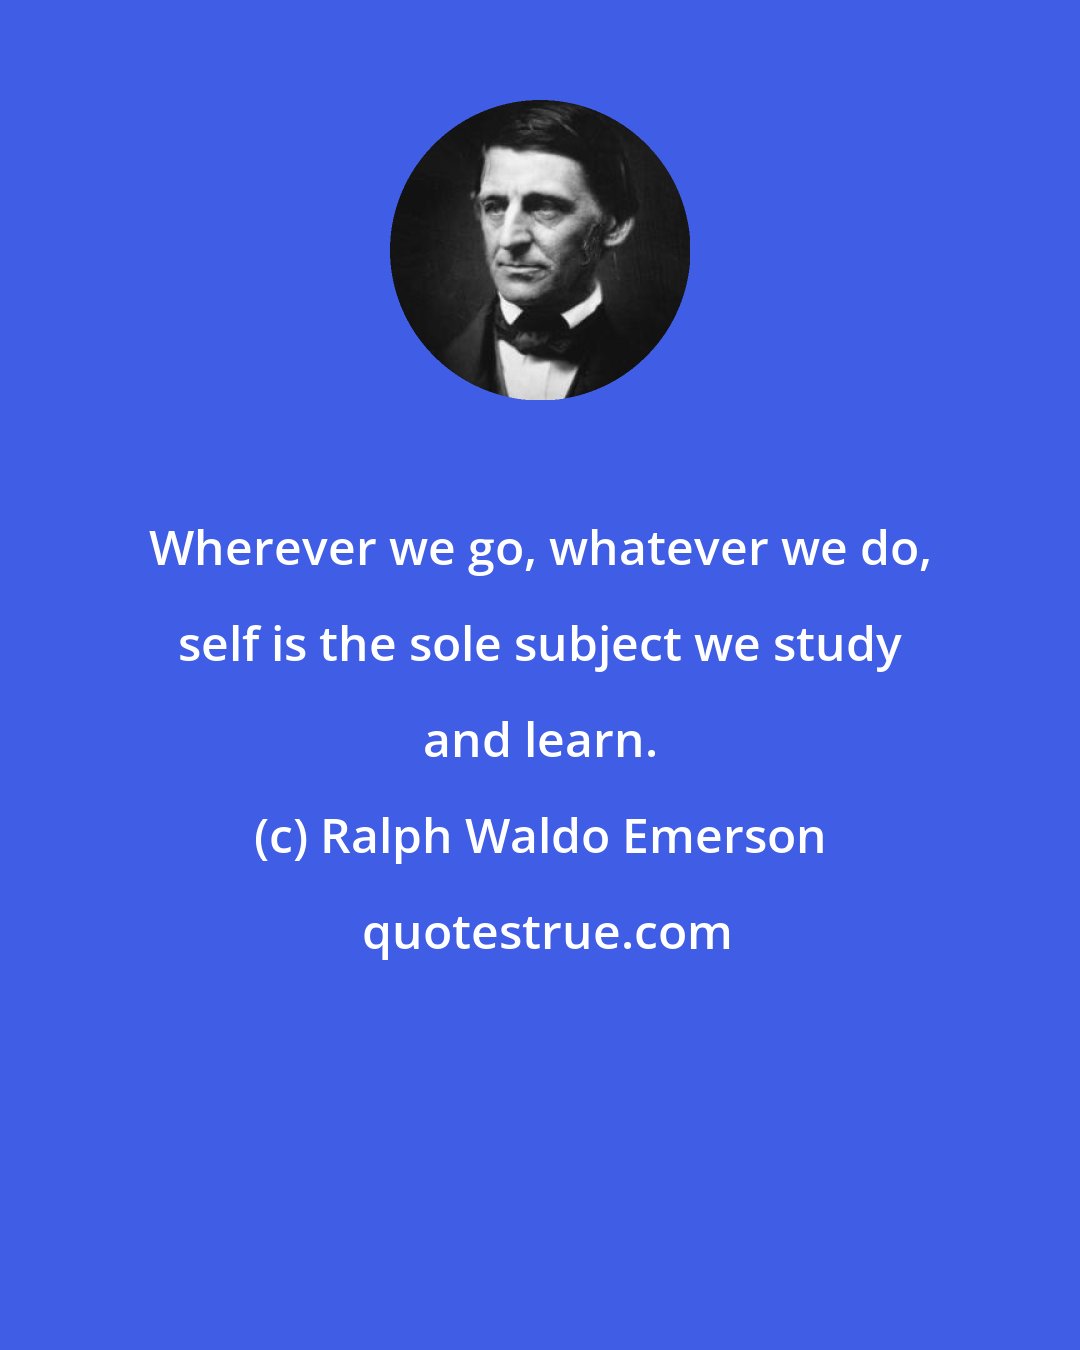 Ralph Waldo Emerson: Wherever we go, whatever we do, self is the sole subject we study and learn.